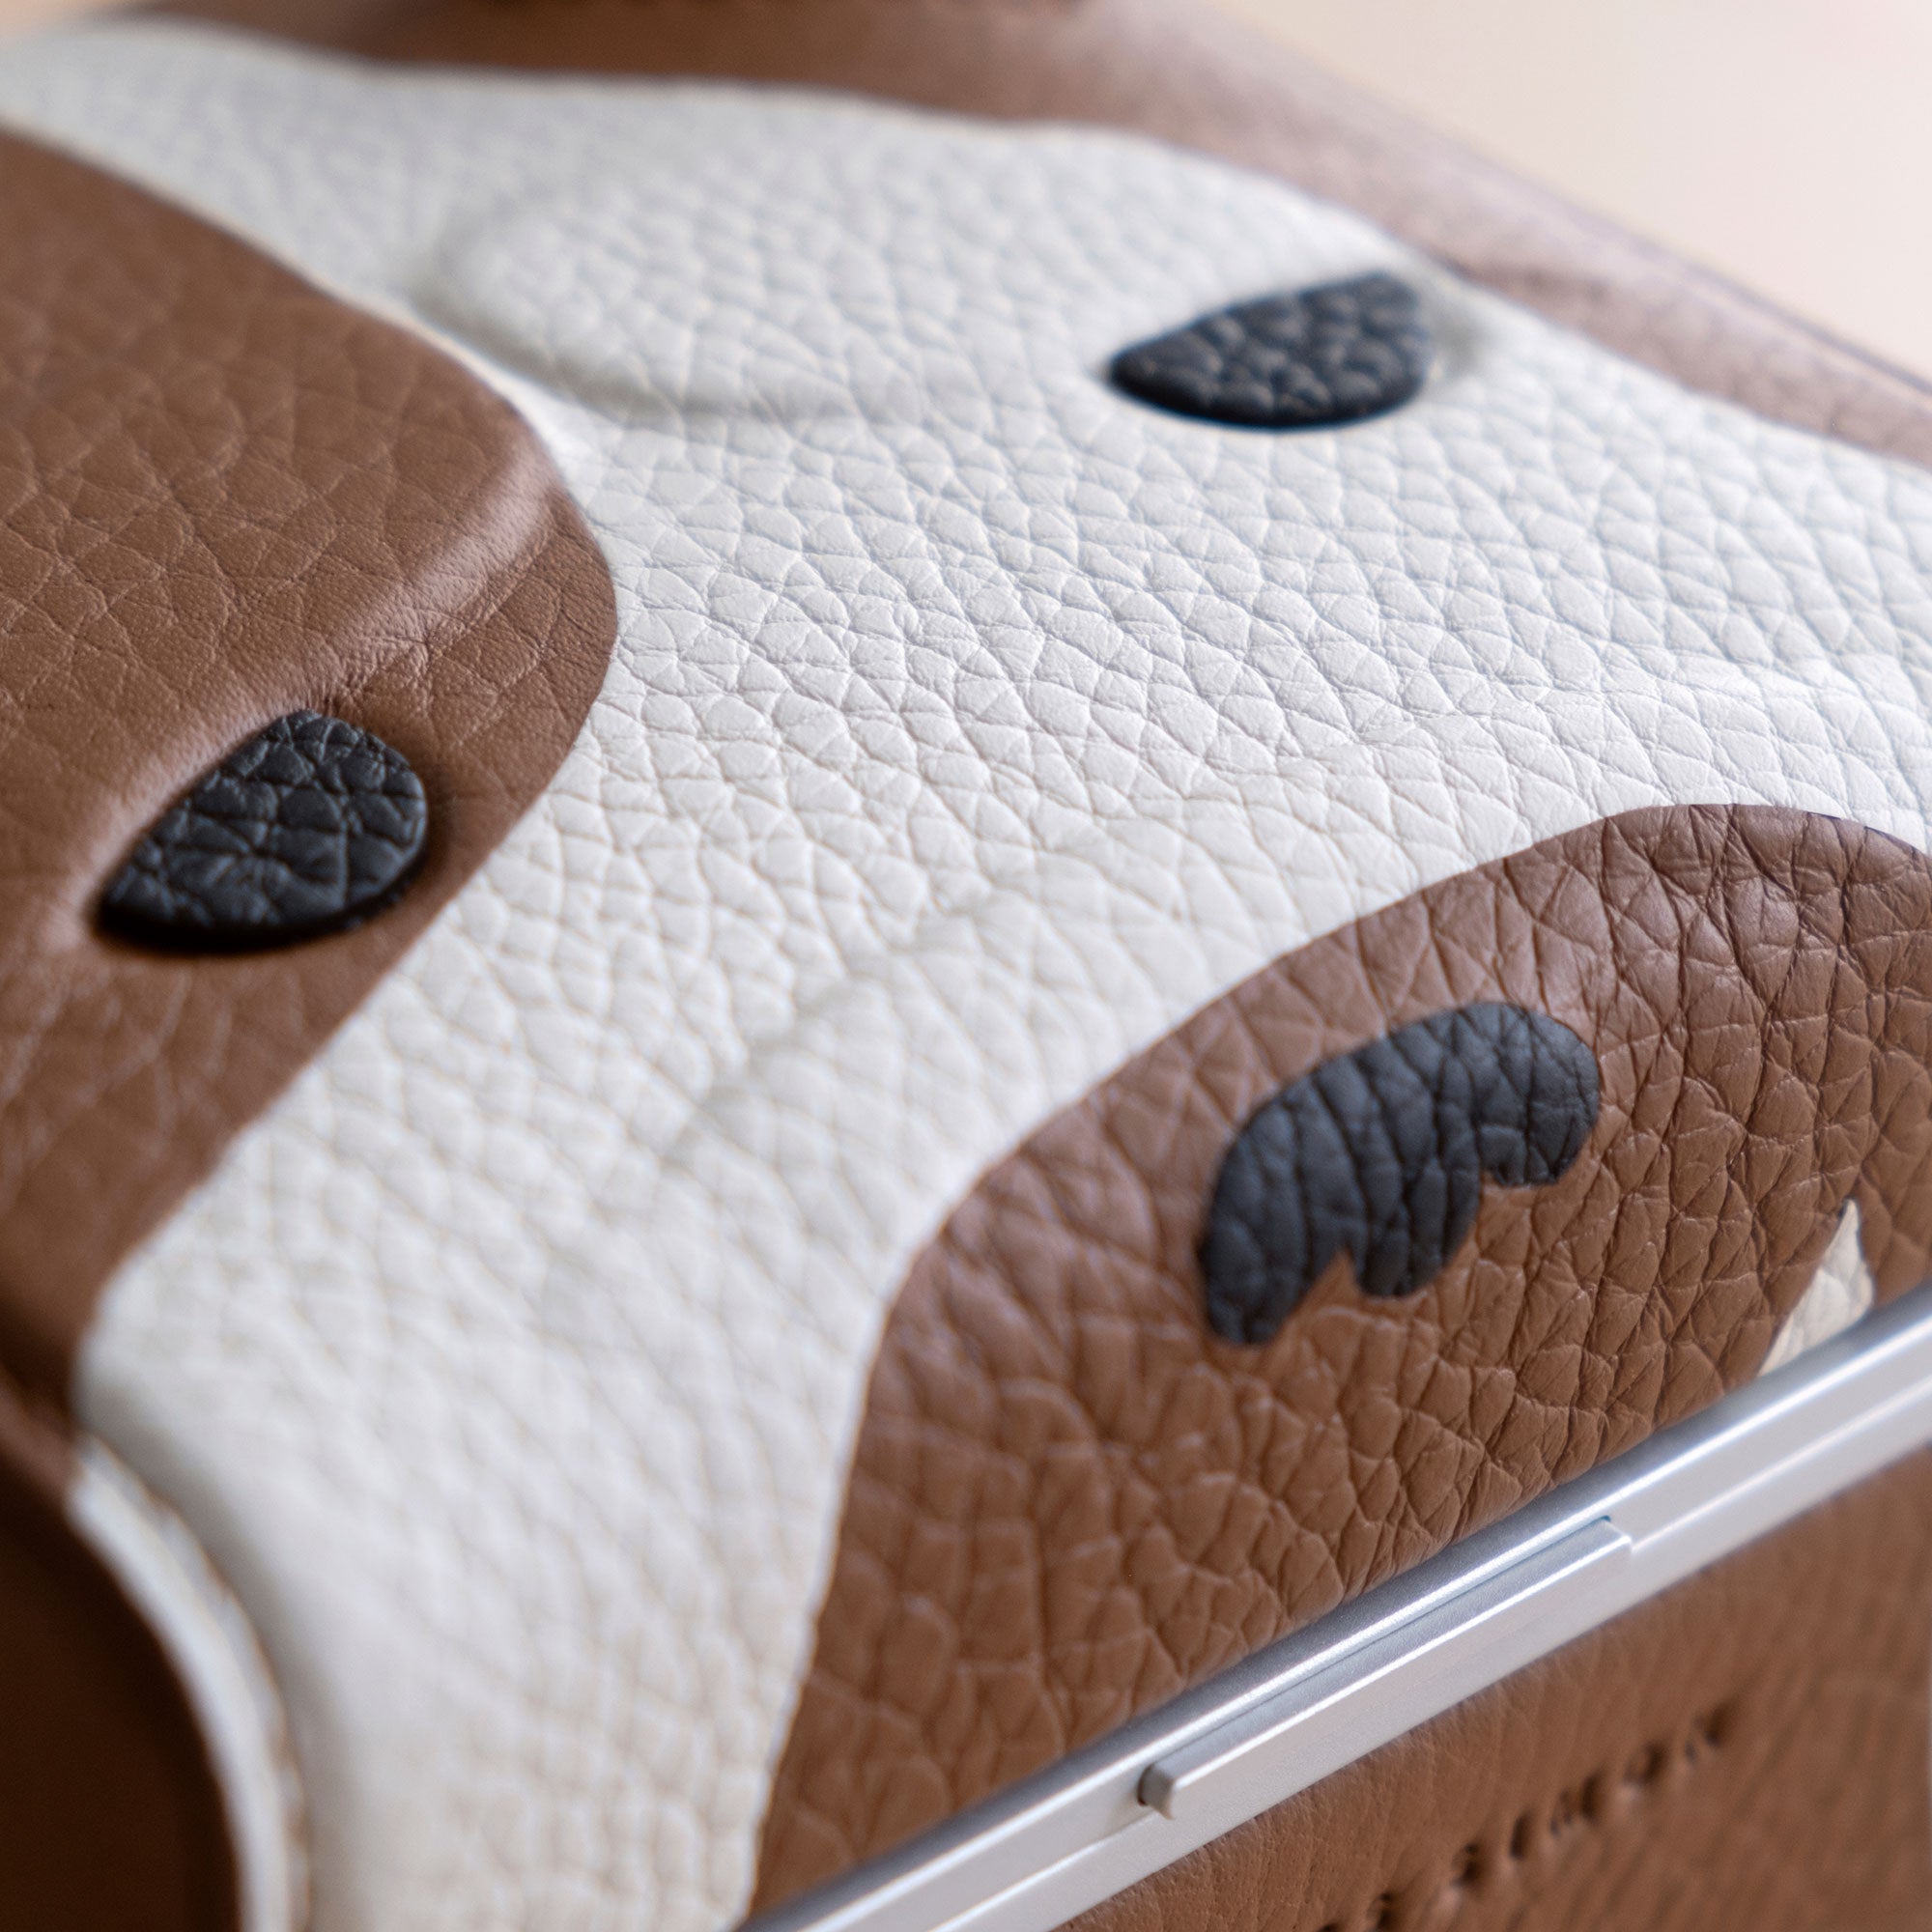 Detail photo of the face of the Bulldog Special Edition Eaton 1 Watch case. Handmade from French leather using advanced leather working techniques, including leather inlays and embossing. 